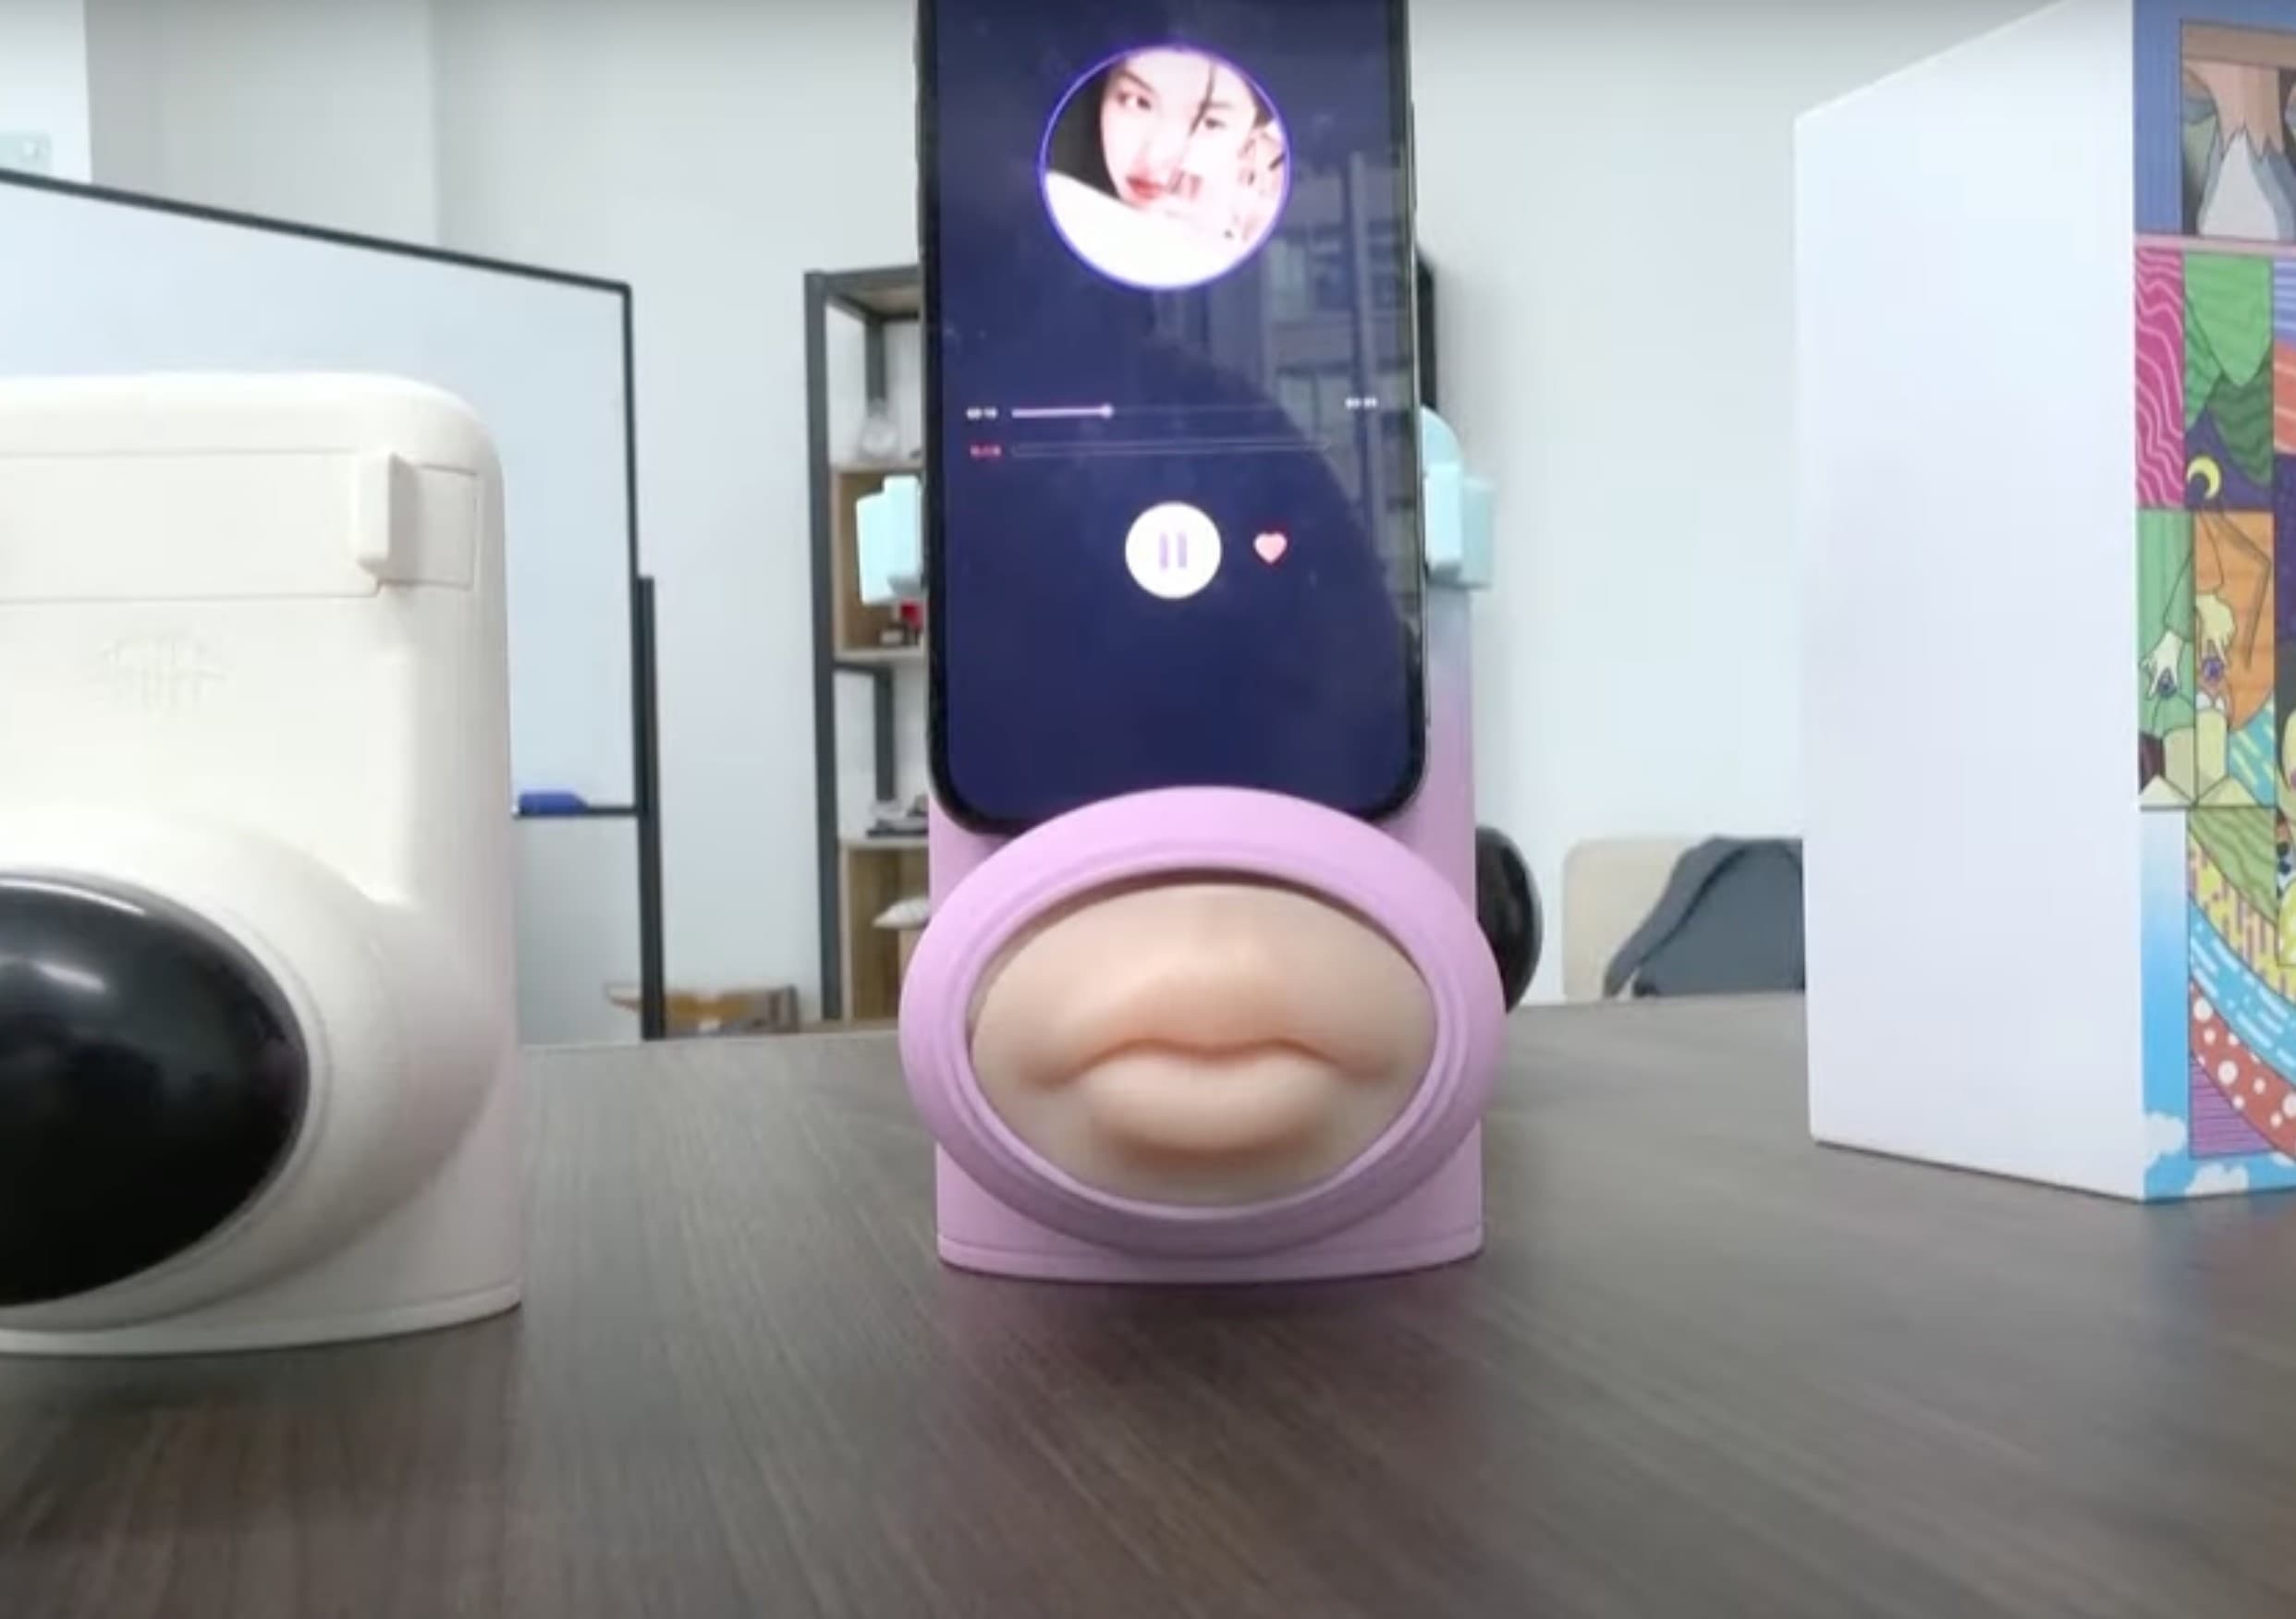 Missing someone? Pair iPhone with this creepy new kissing machine.